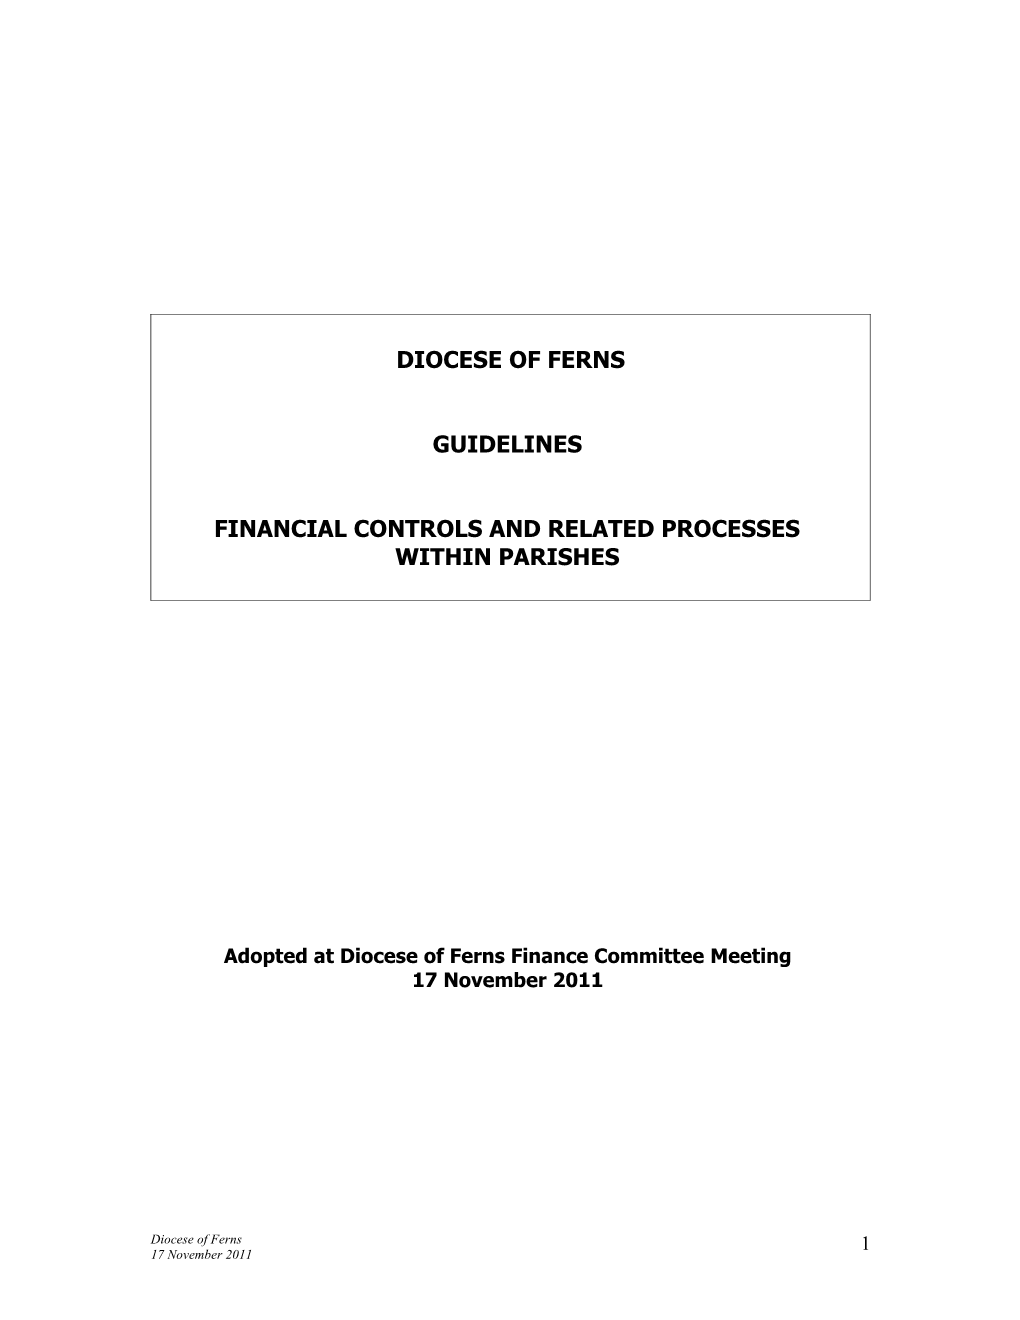 Financial Controls and Related Processes